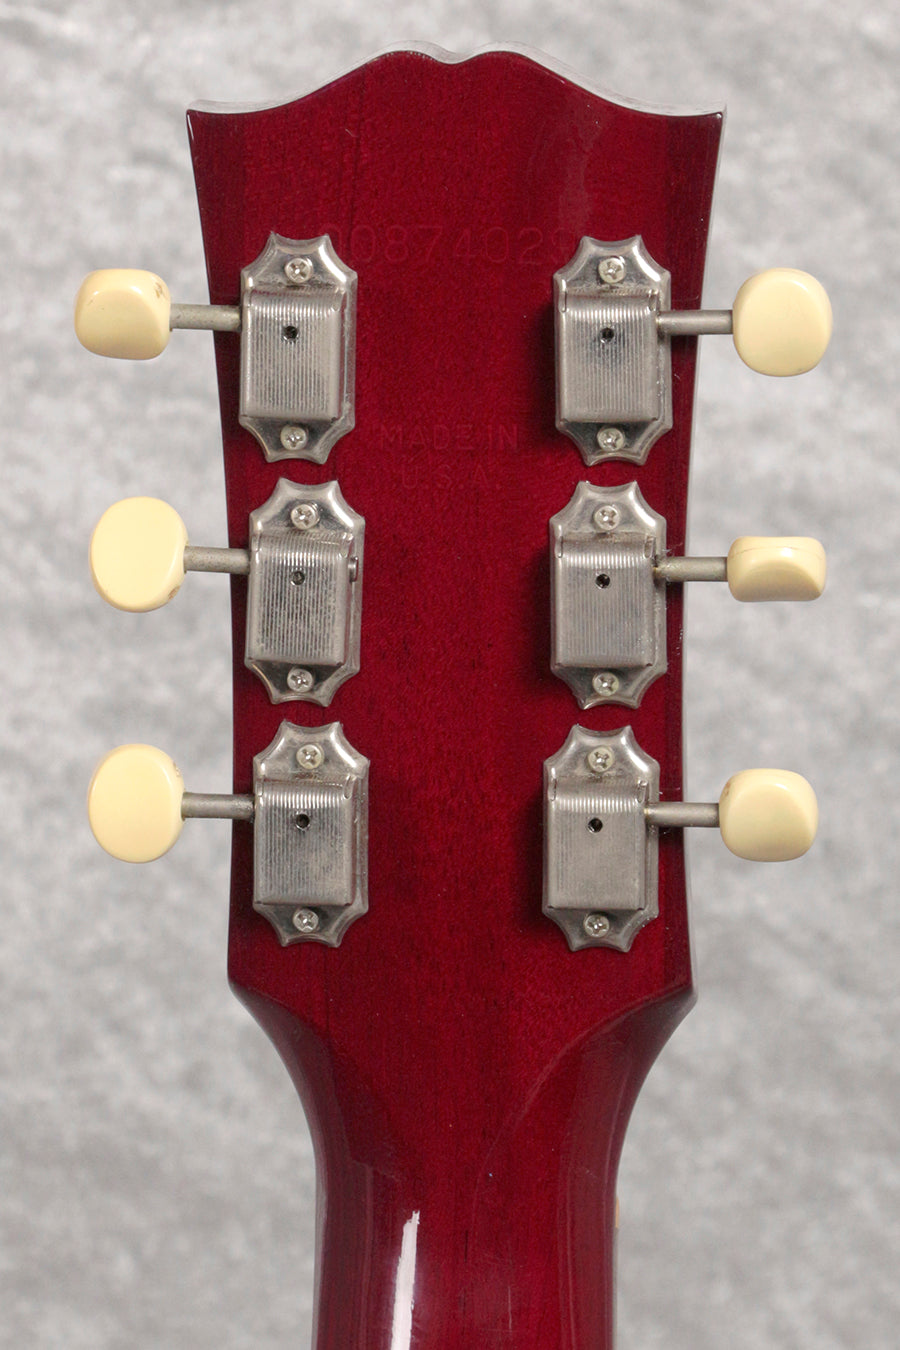 [SN 008874029] USED Gibson / 1968 J-45 Cherry Red [06]